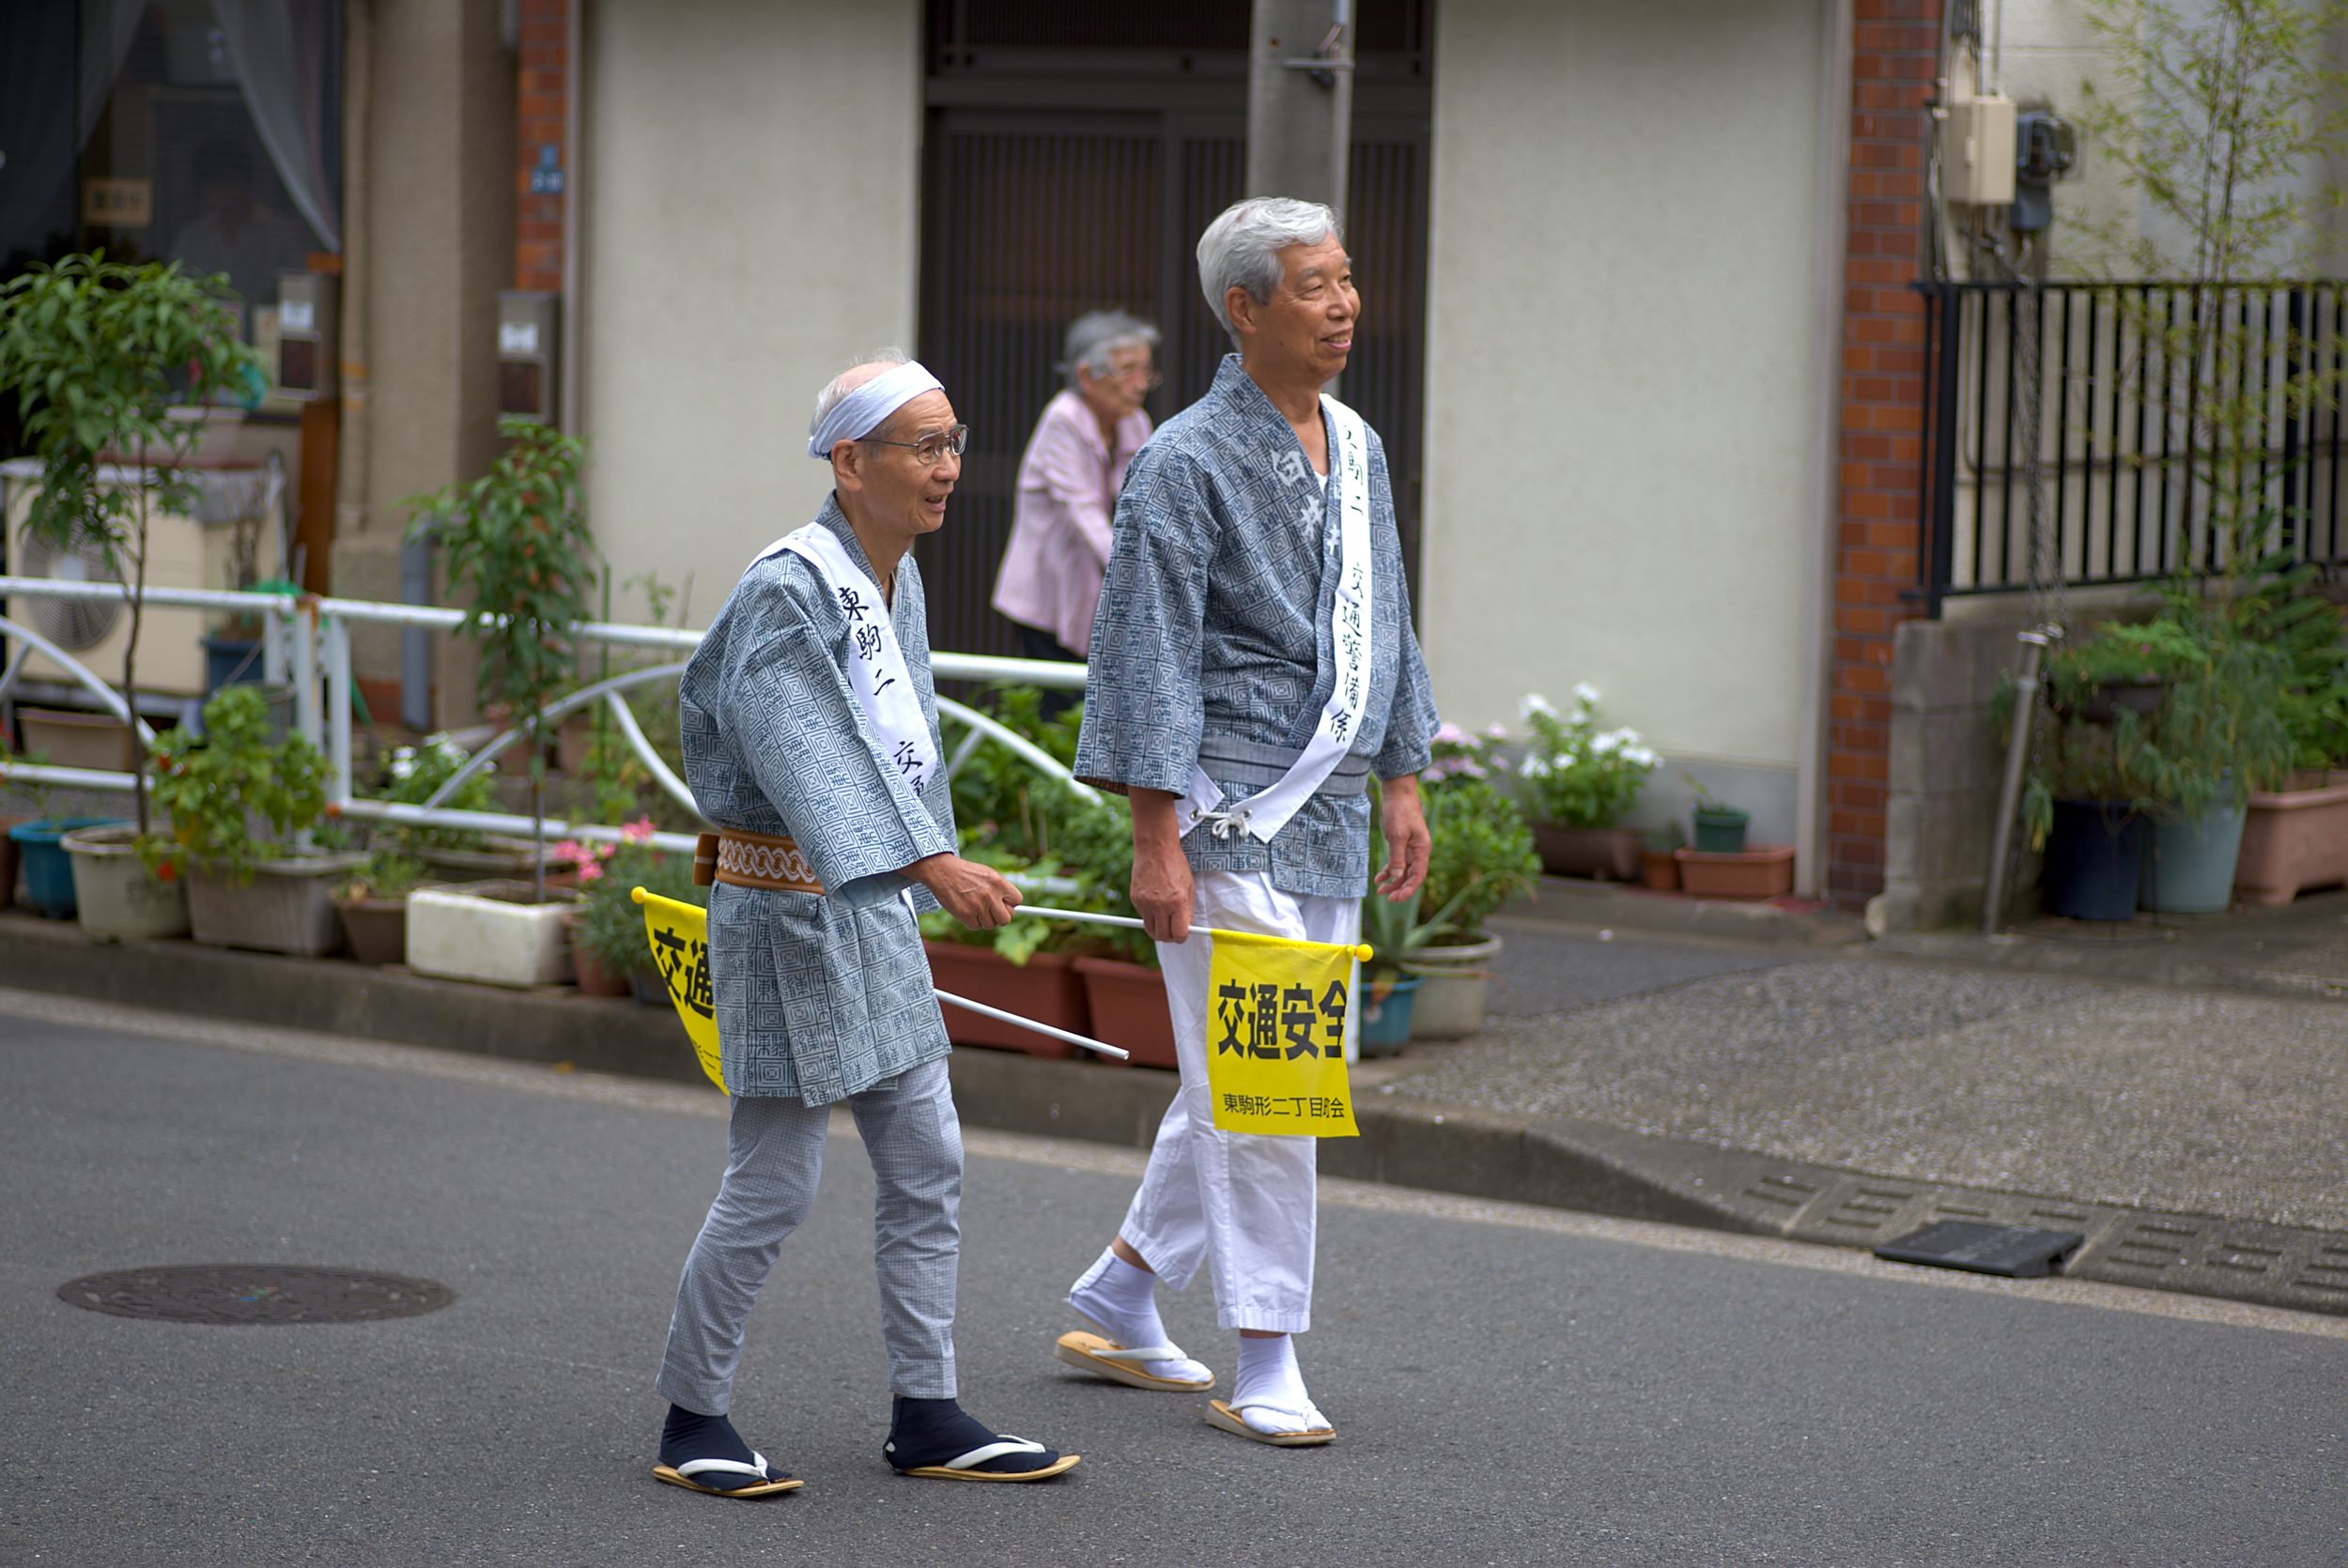 Two old man walking on the street with small yellow flags